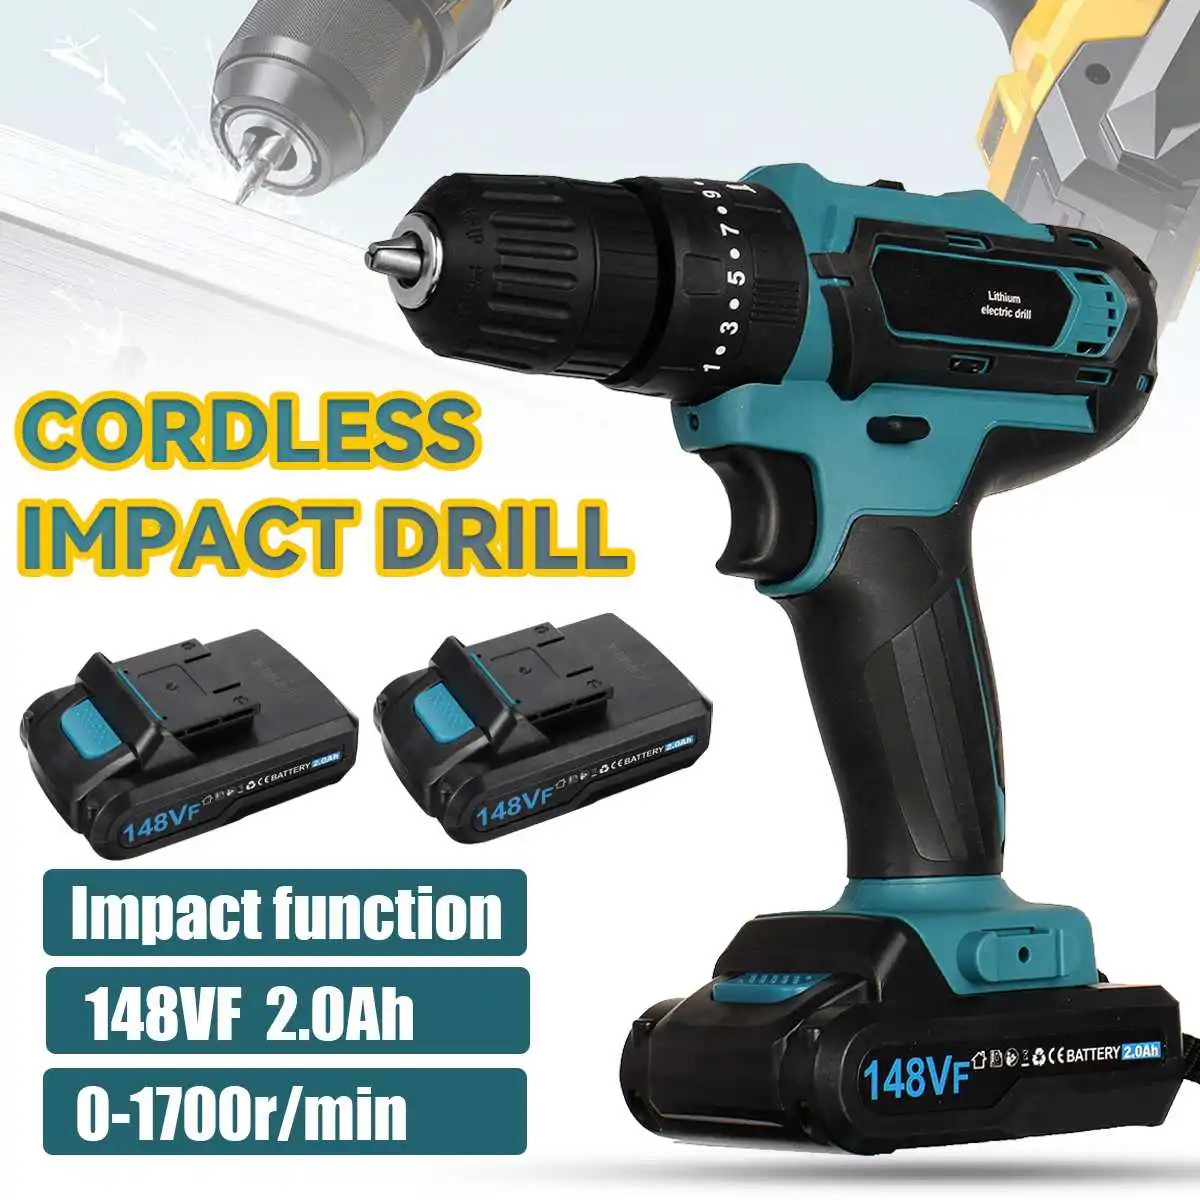 Drillpro 148VF 45Nm Brushless Electric Impact Drill 25 Torque Cordless Electreic Screwdriver with Rechargeable Lithium Battery